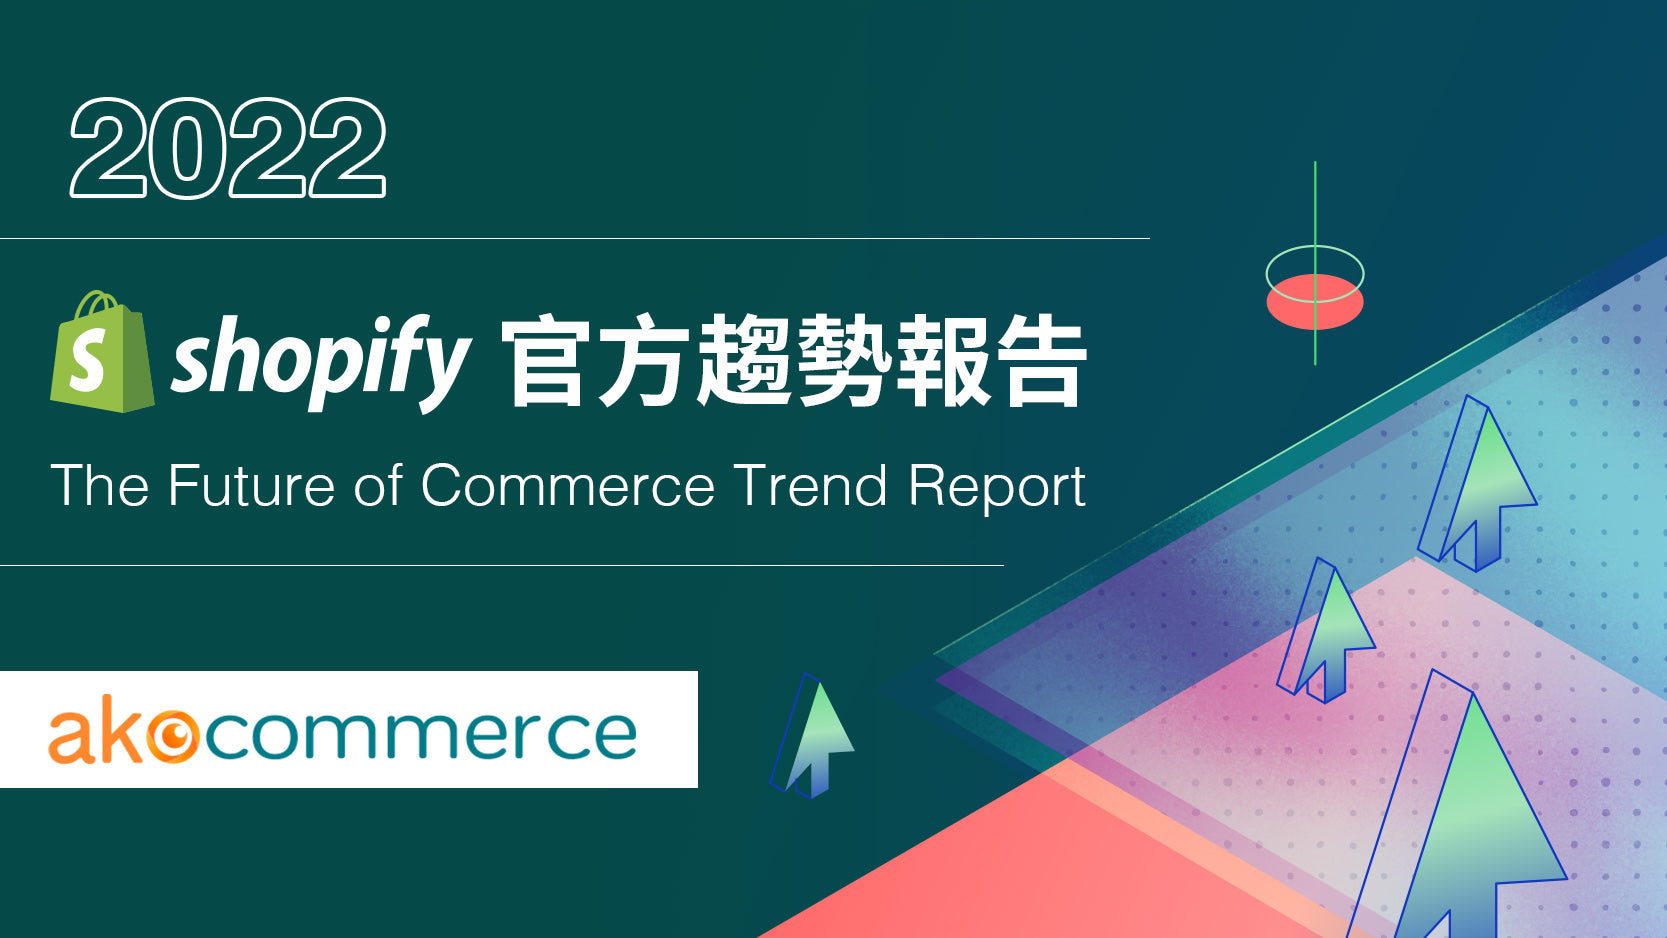 2022 Shopify The Future of Commerce Trend Report 